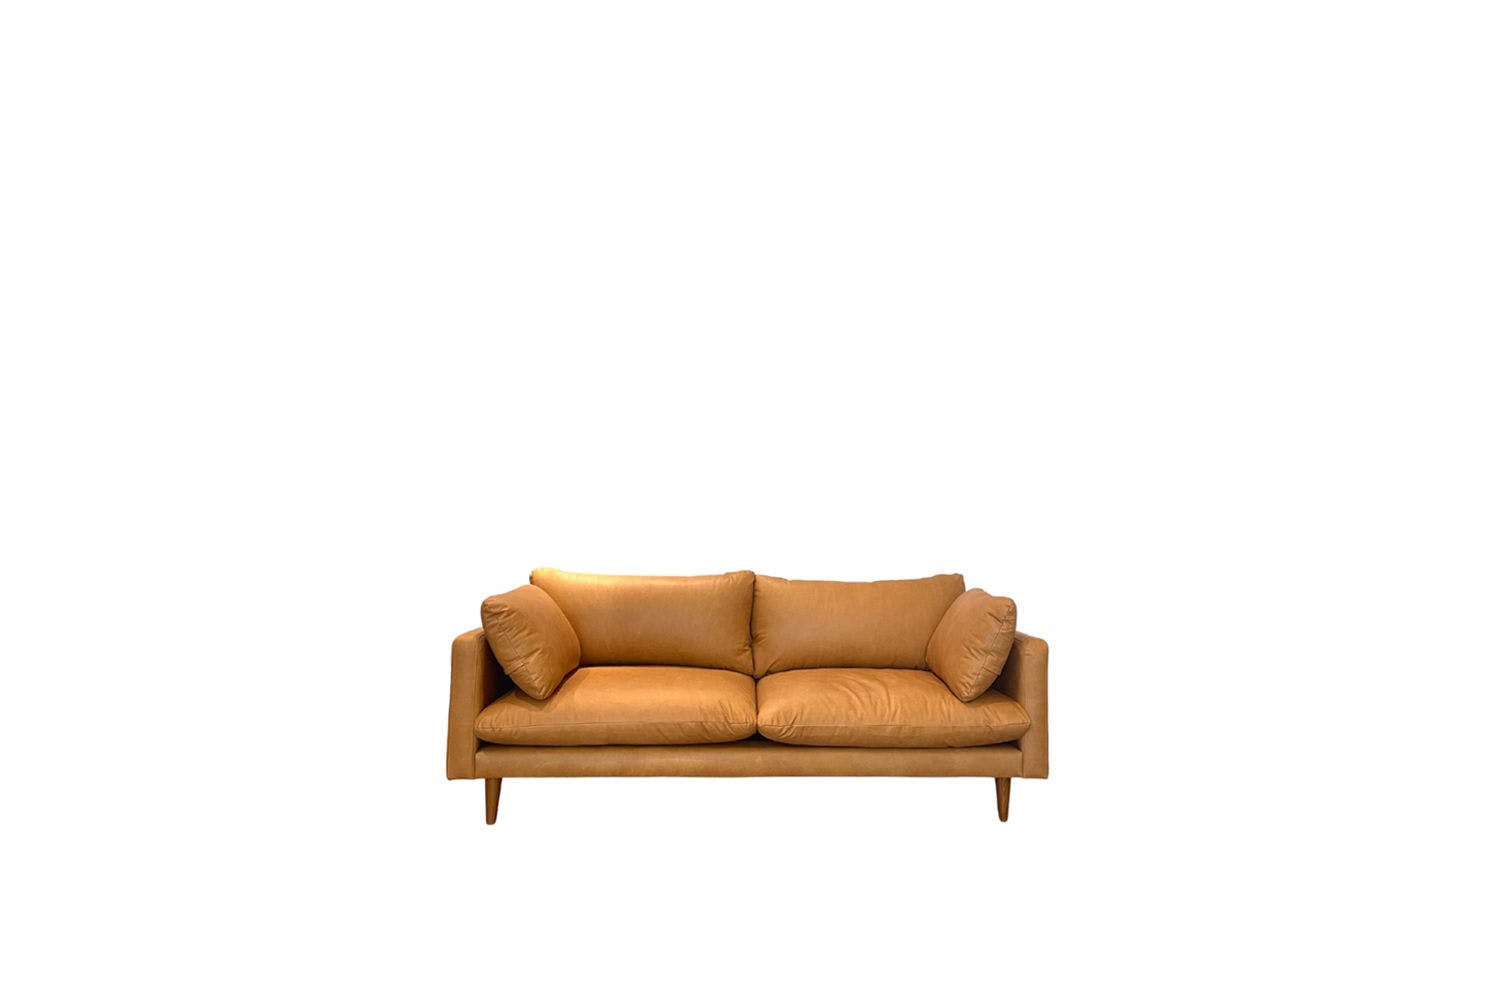 Sofa RS 10 Featured Image